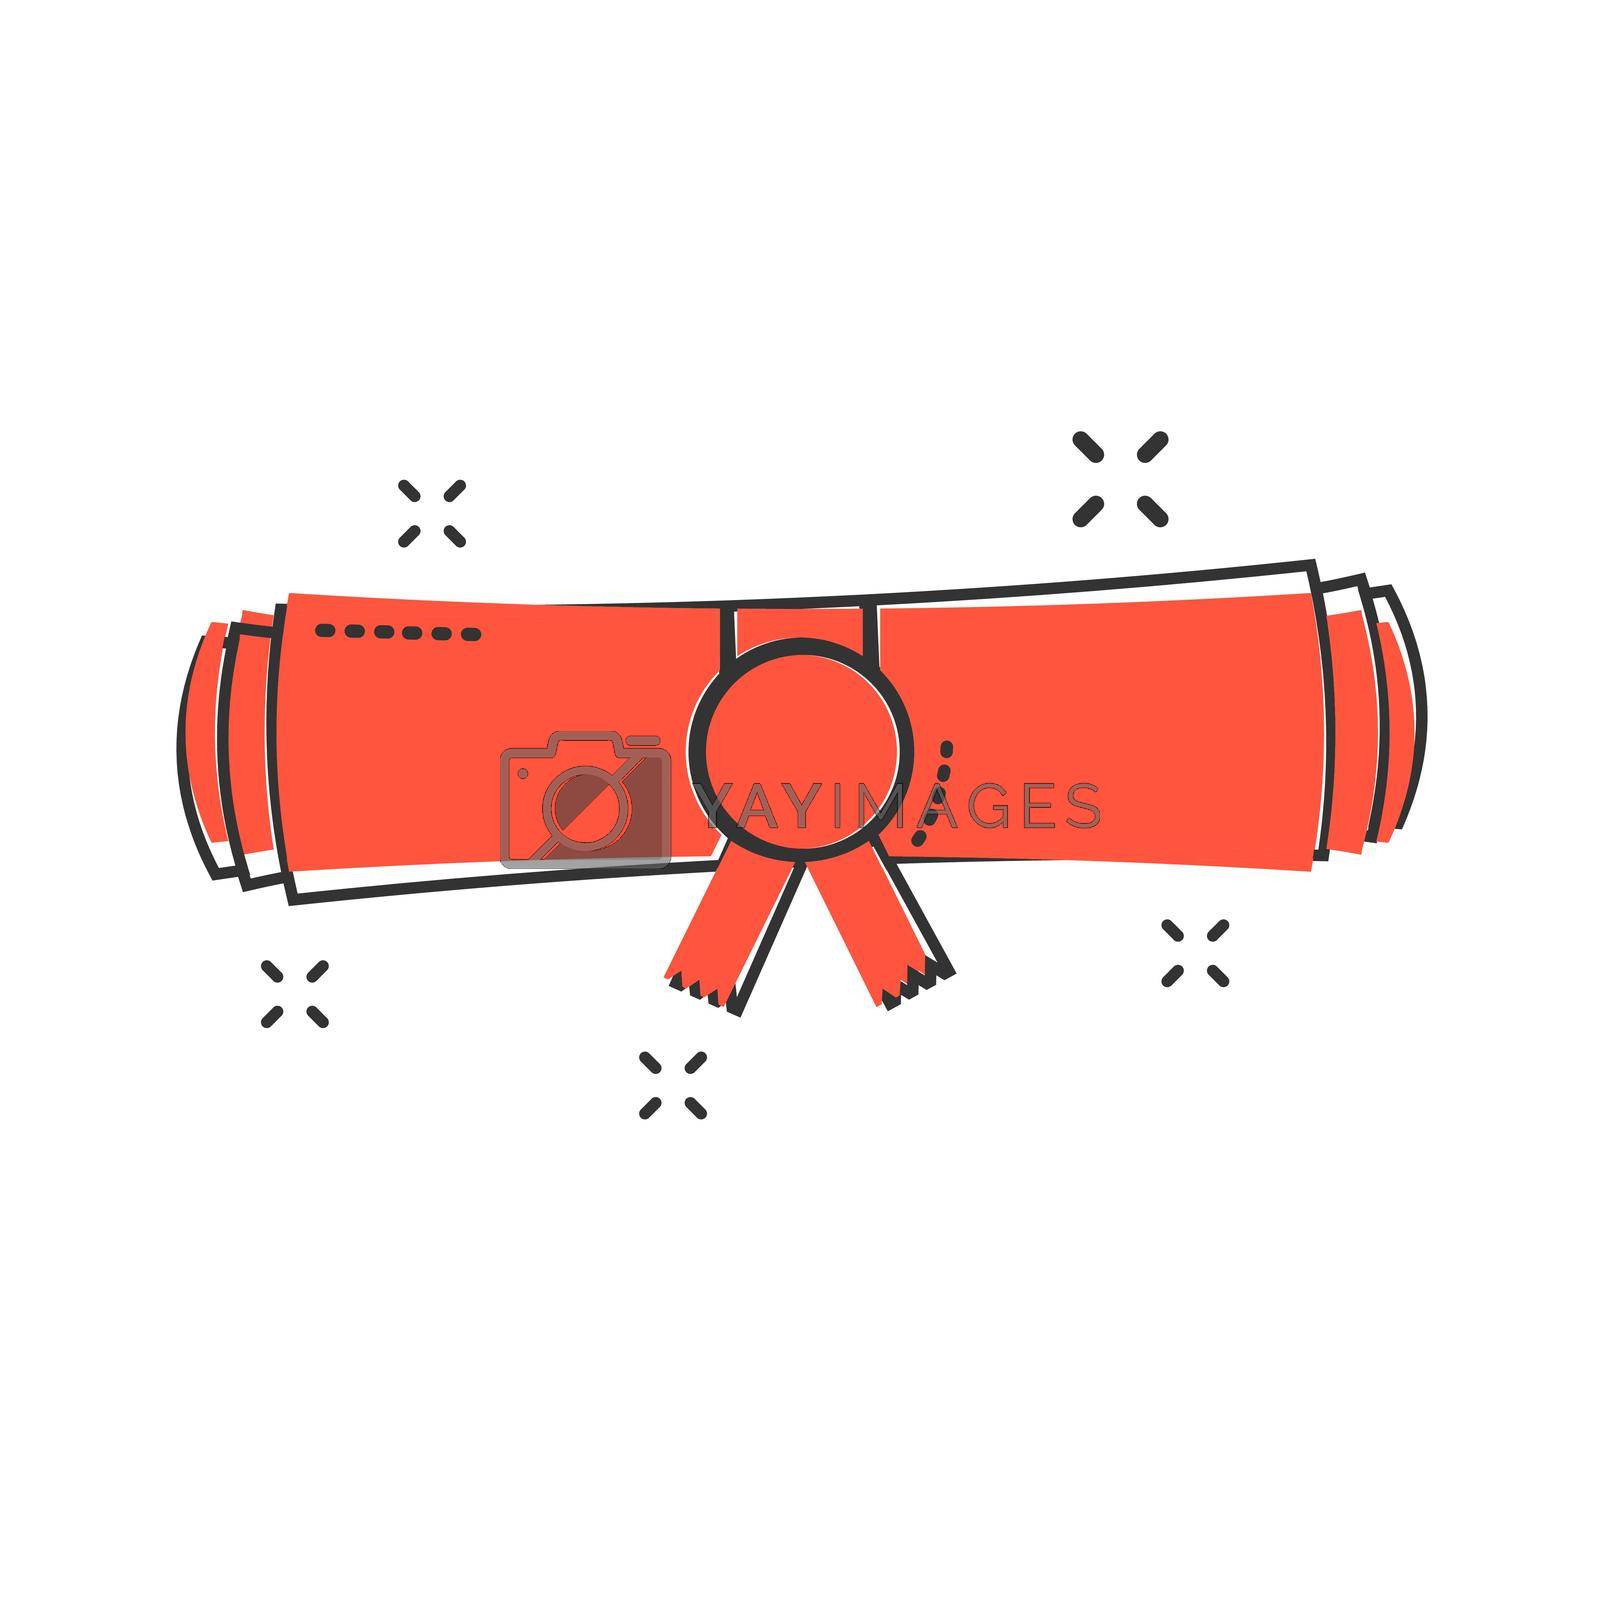 Cartoon diploma rolled scroll icon in comic style. Graduate scroll sign illustration pictogram. Education business concept.